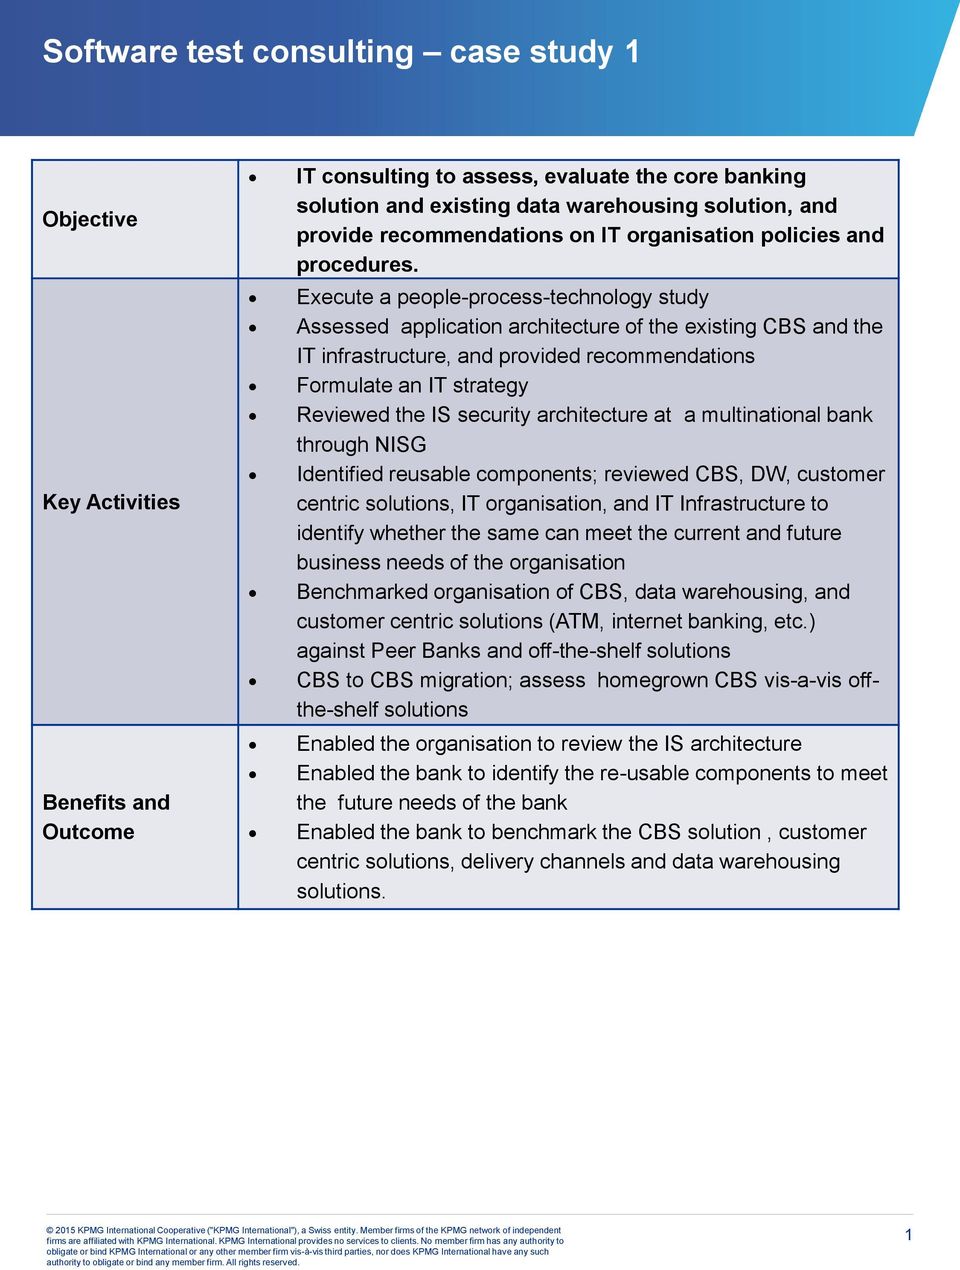 Execute a people-process-technology study Assessed application architecture of the existing CBS and the IT infrastructure, and provided recommendations Formulate an IT strategy Reviewed the IS